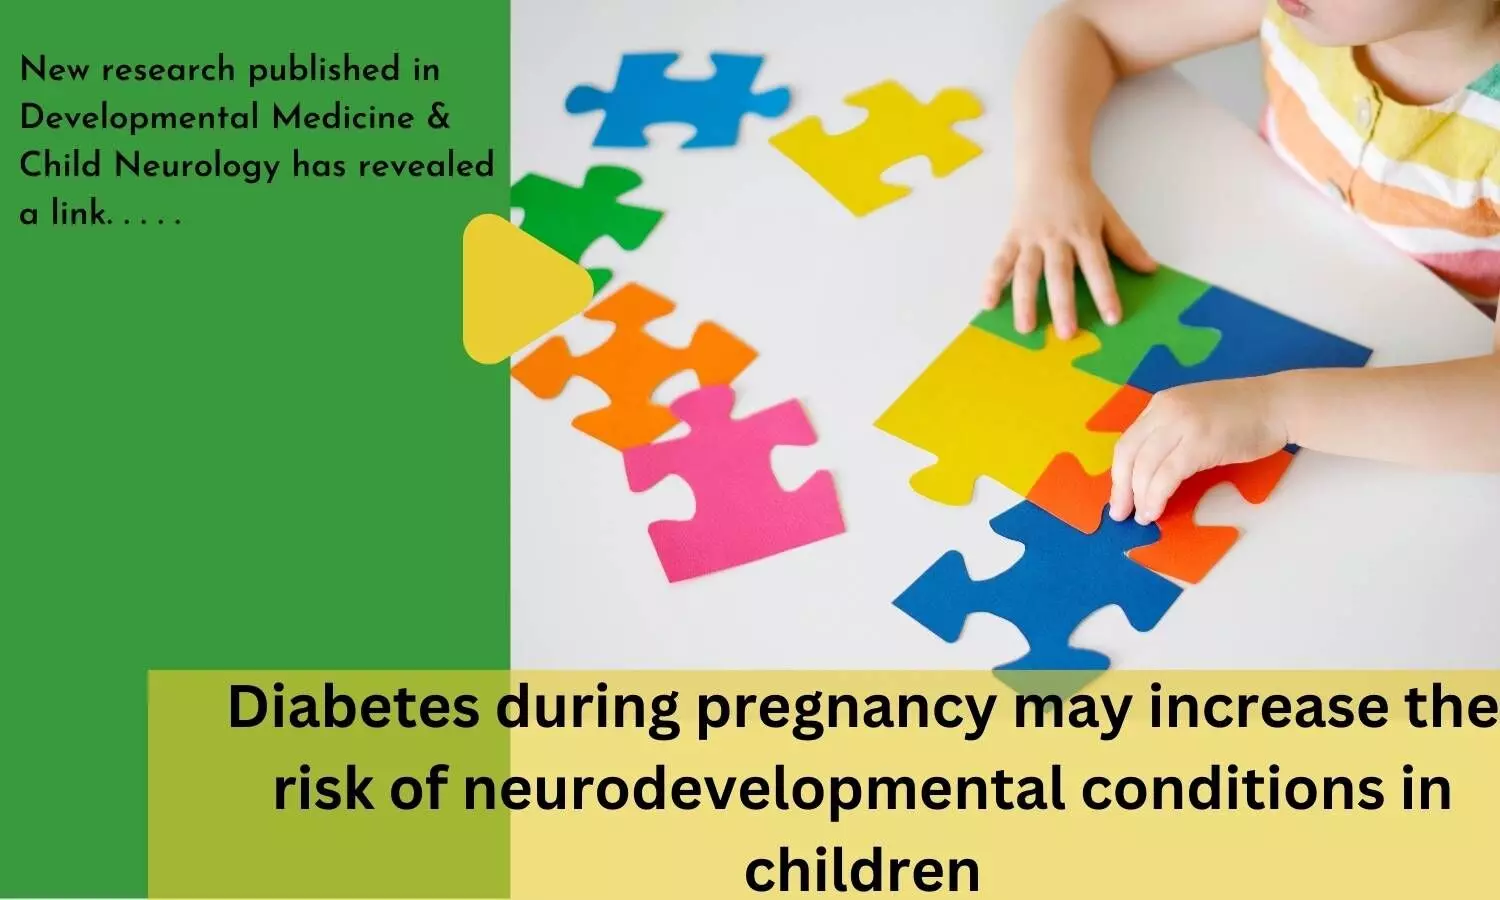 Diabetes during pregnancy may increase the risk of neurodevelopmental conditions in children